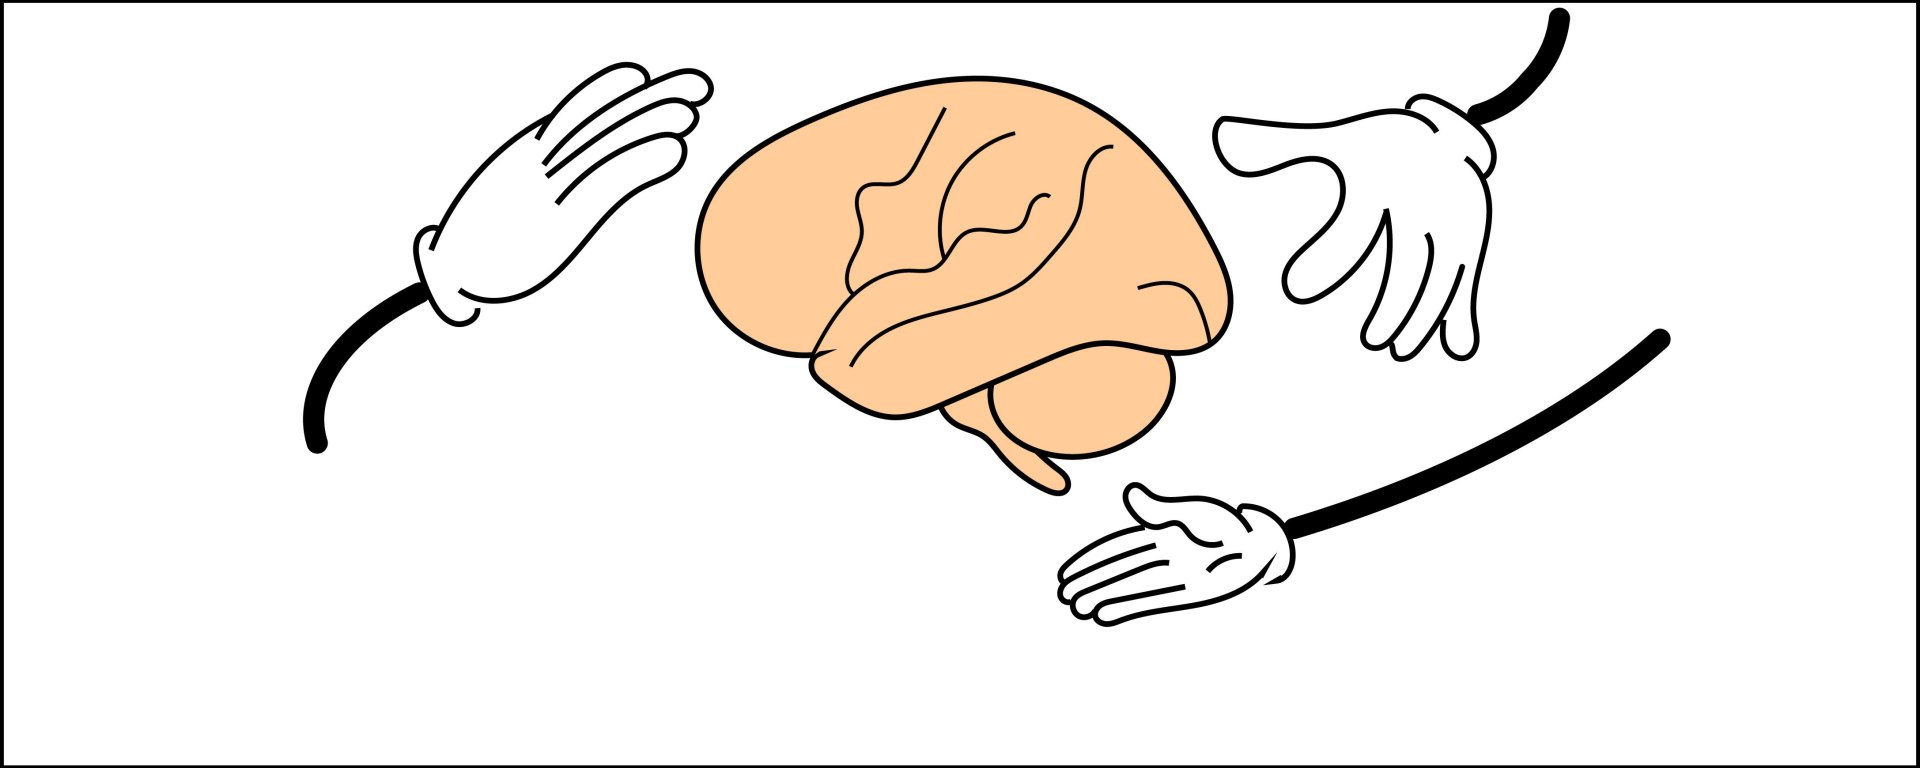 5 senses clipart tactile learning